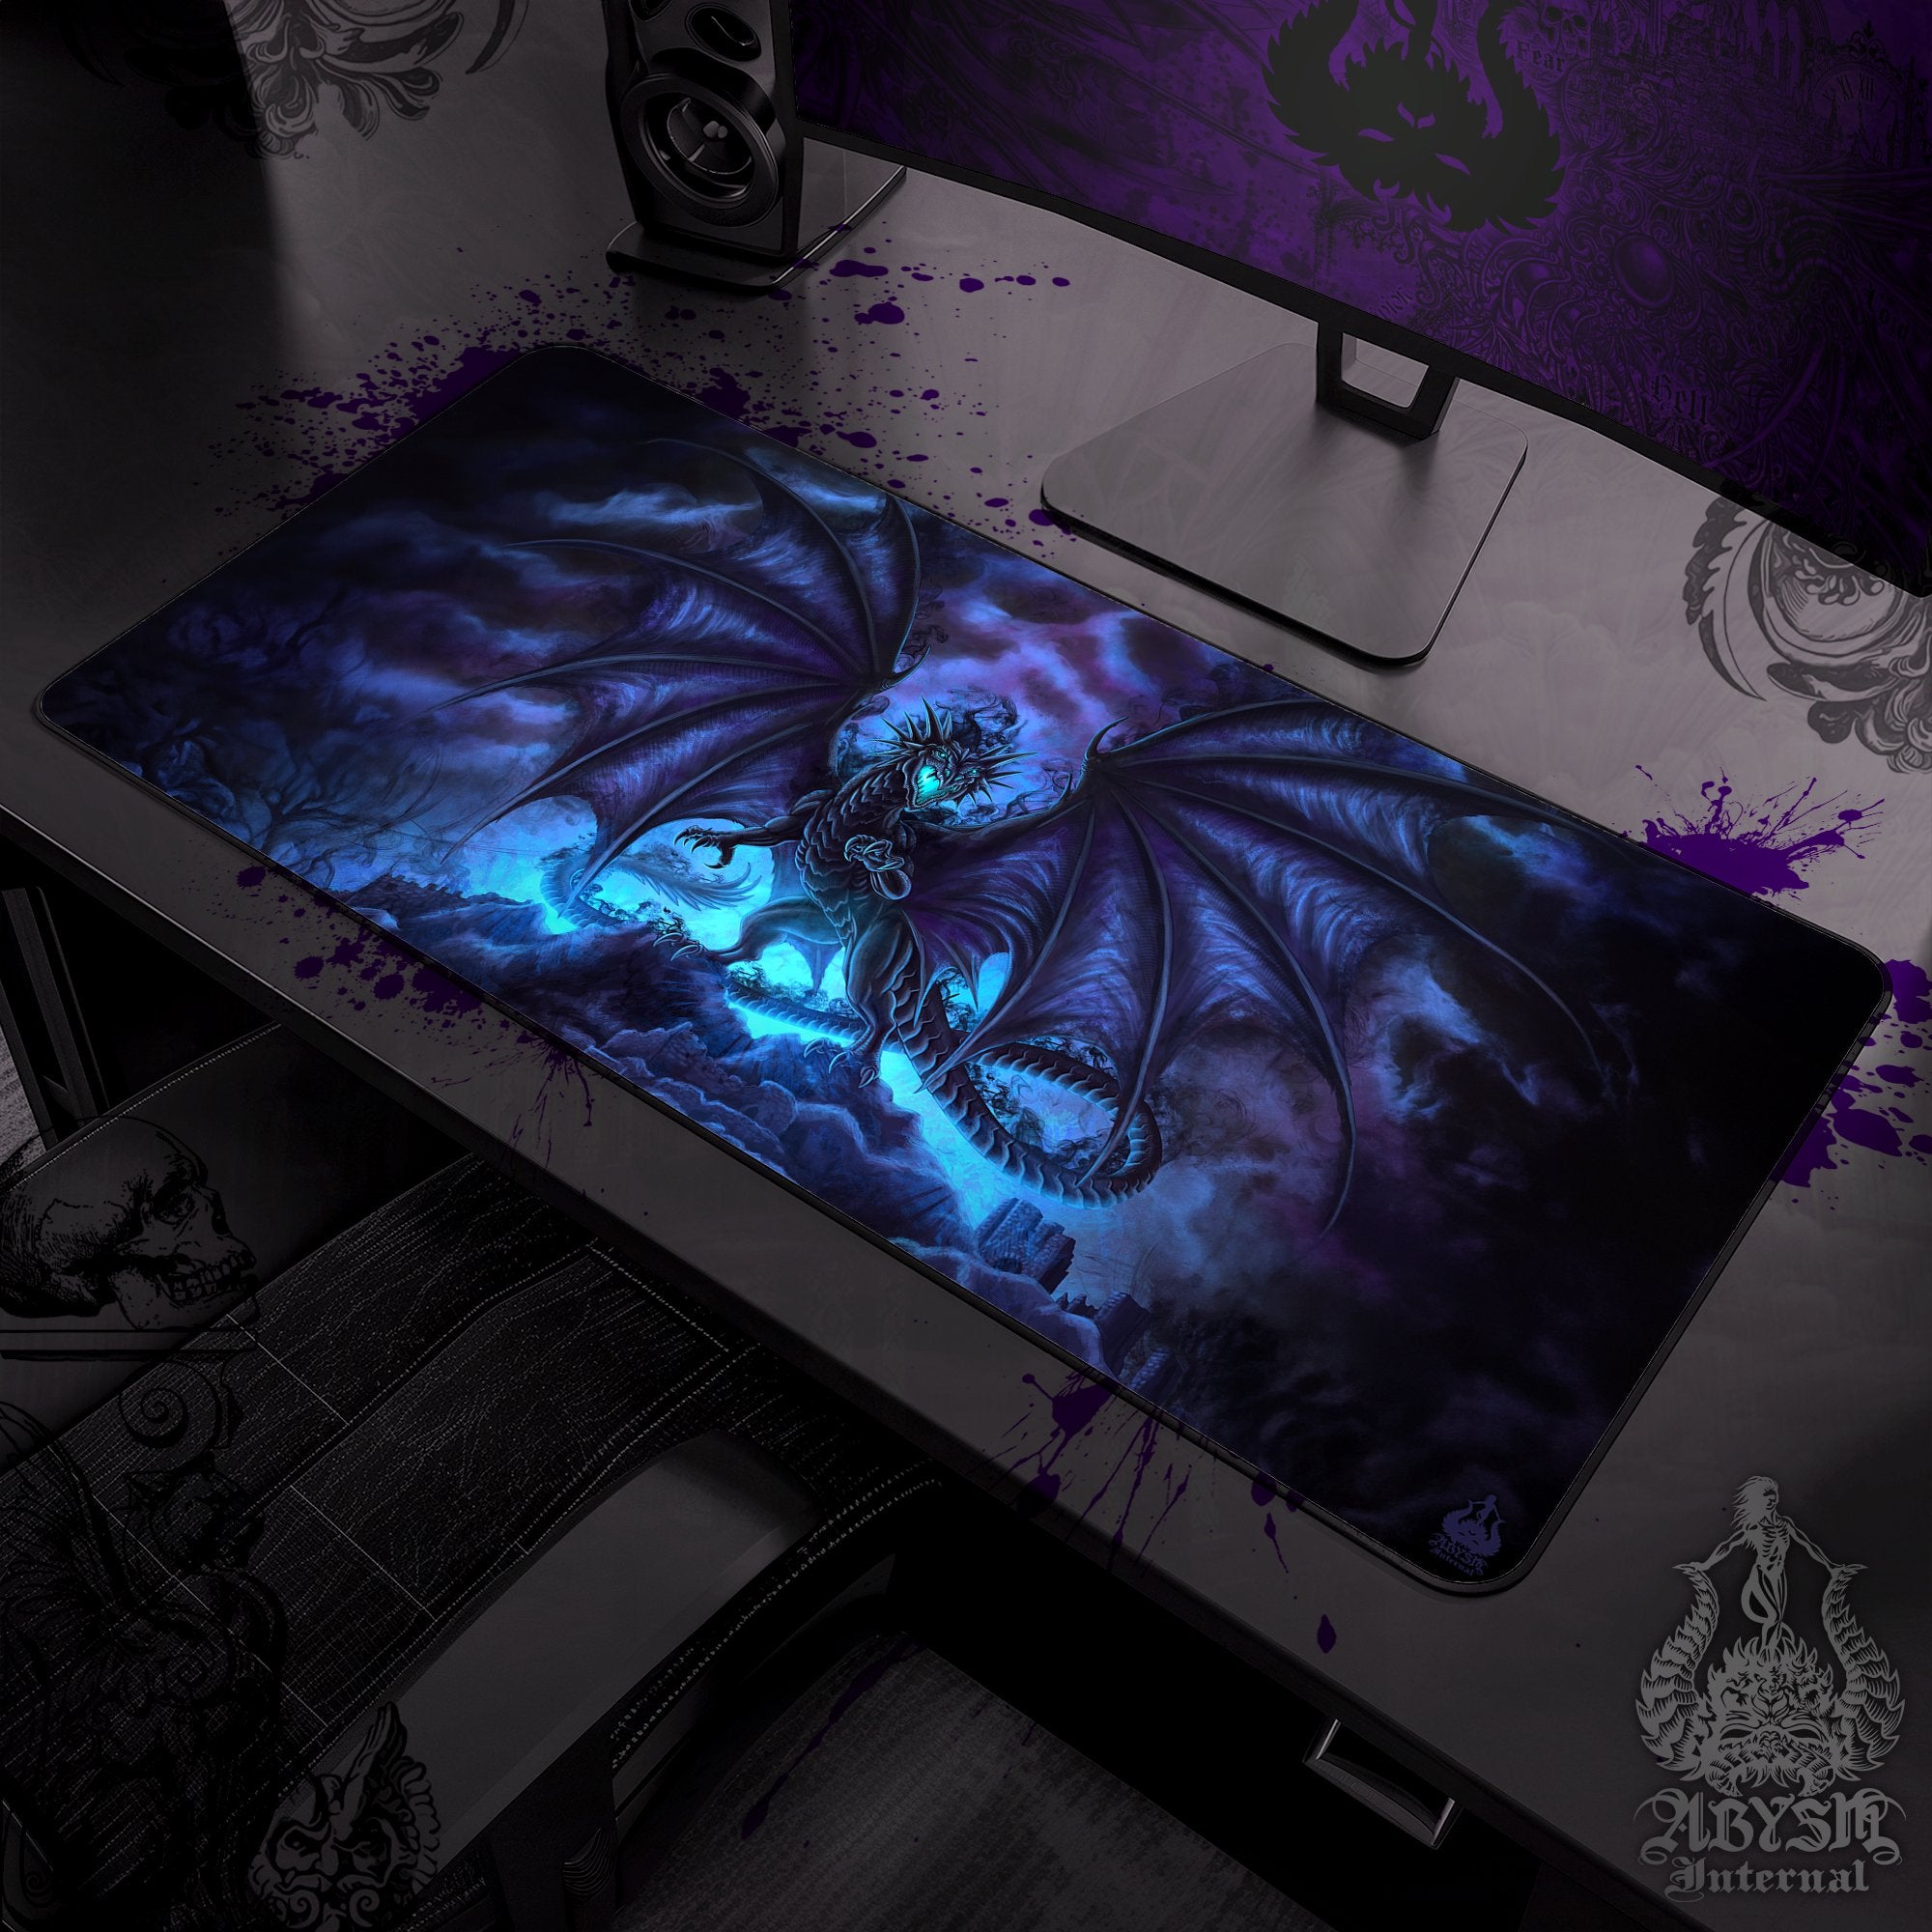 Dragon Gaming Mouse Pad, Shadow Desk Mat, Lethus Dragon Table Protector Cover, RPG Workpad, Print DM Gift - Blue Black - Abysm Internal